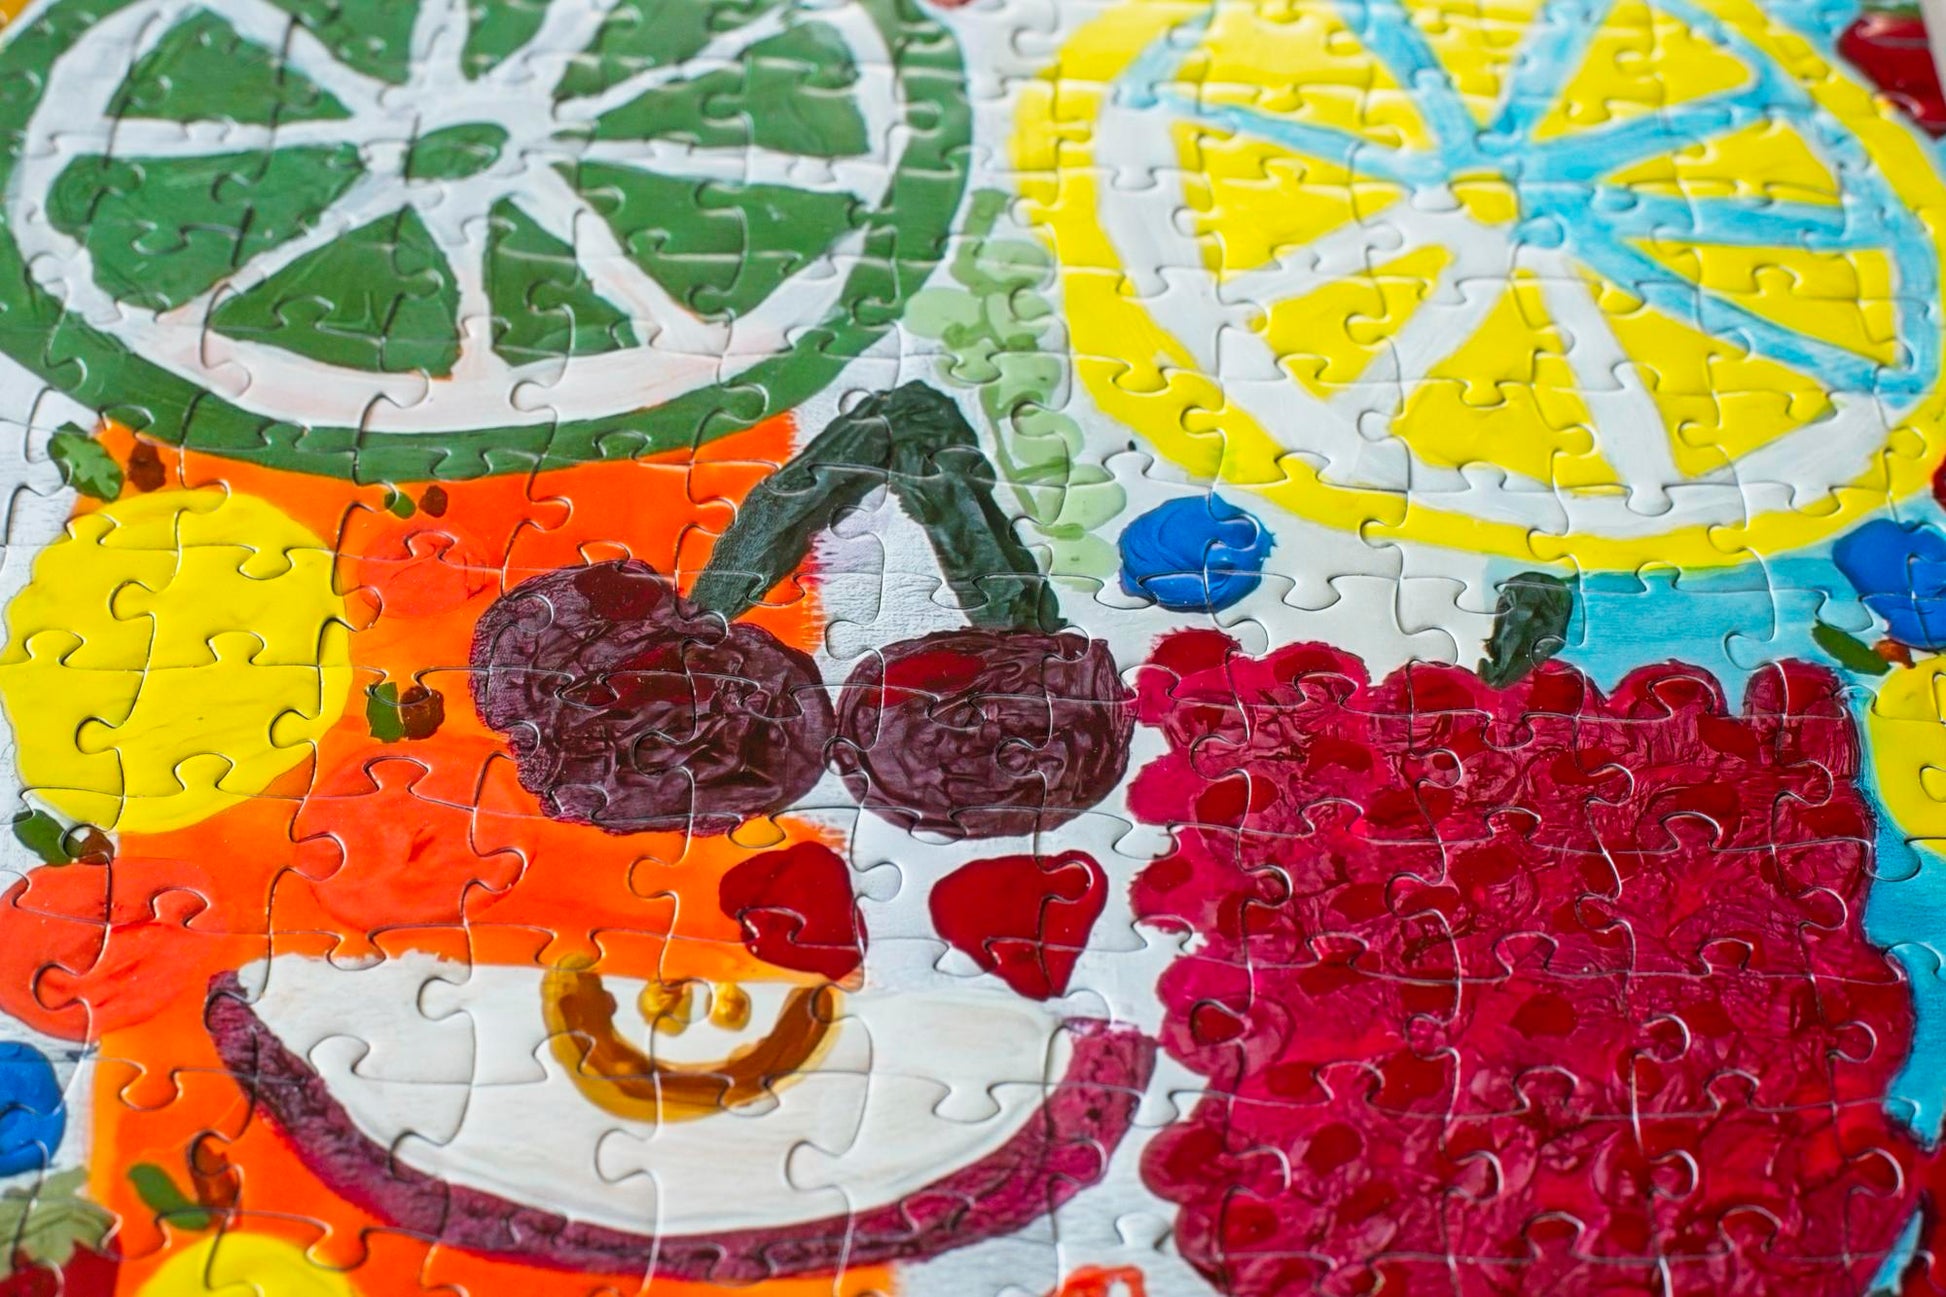 A variety of fruit pieces depicted in a section of a colorful jigsaw puzzle.